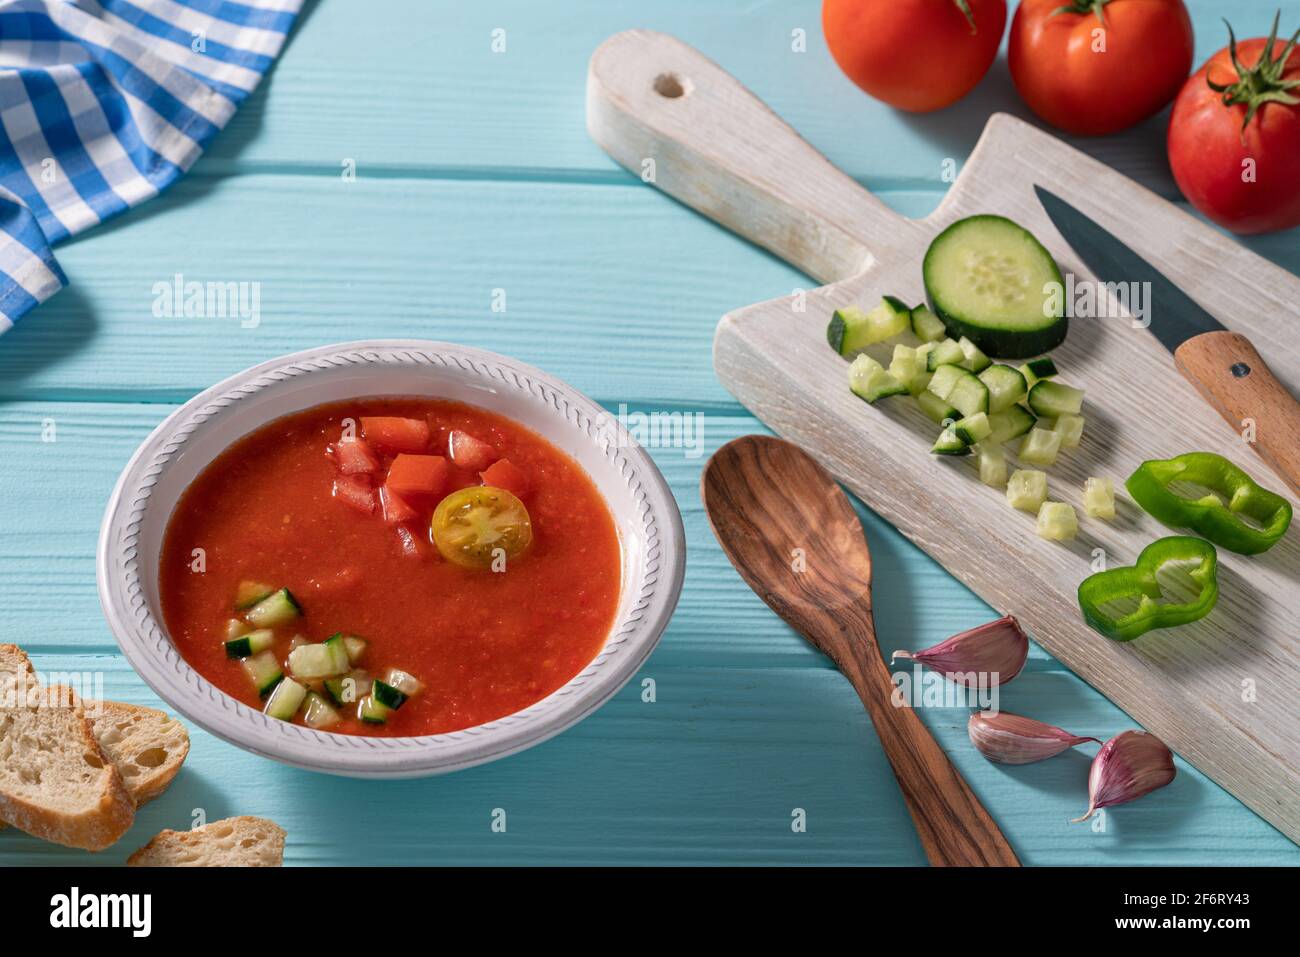 Gazpacho Andaluz is an Andalusian tomato cold soup from Spain with cucumber, garlic, pepper on light blue background. Stock Photo